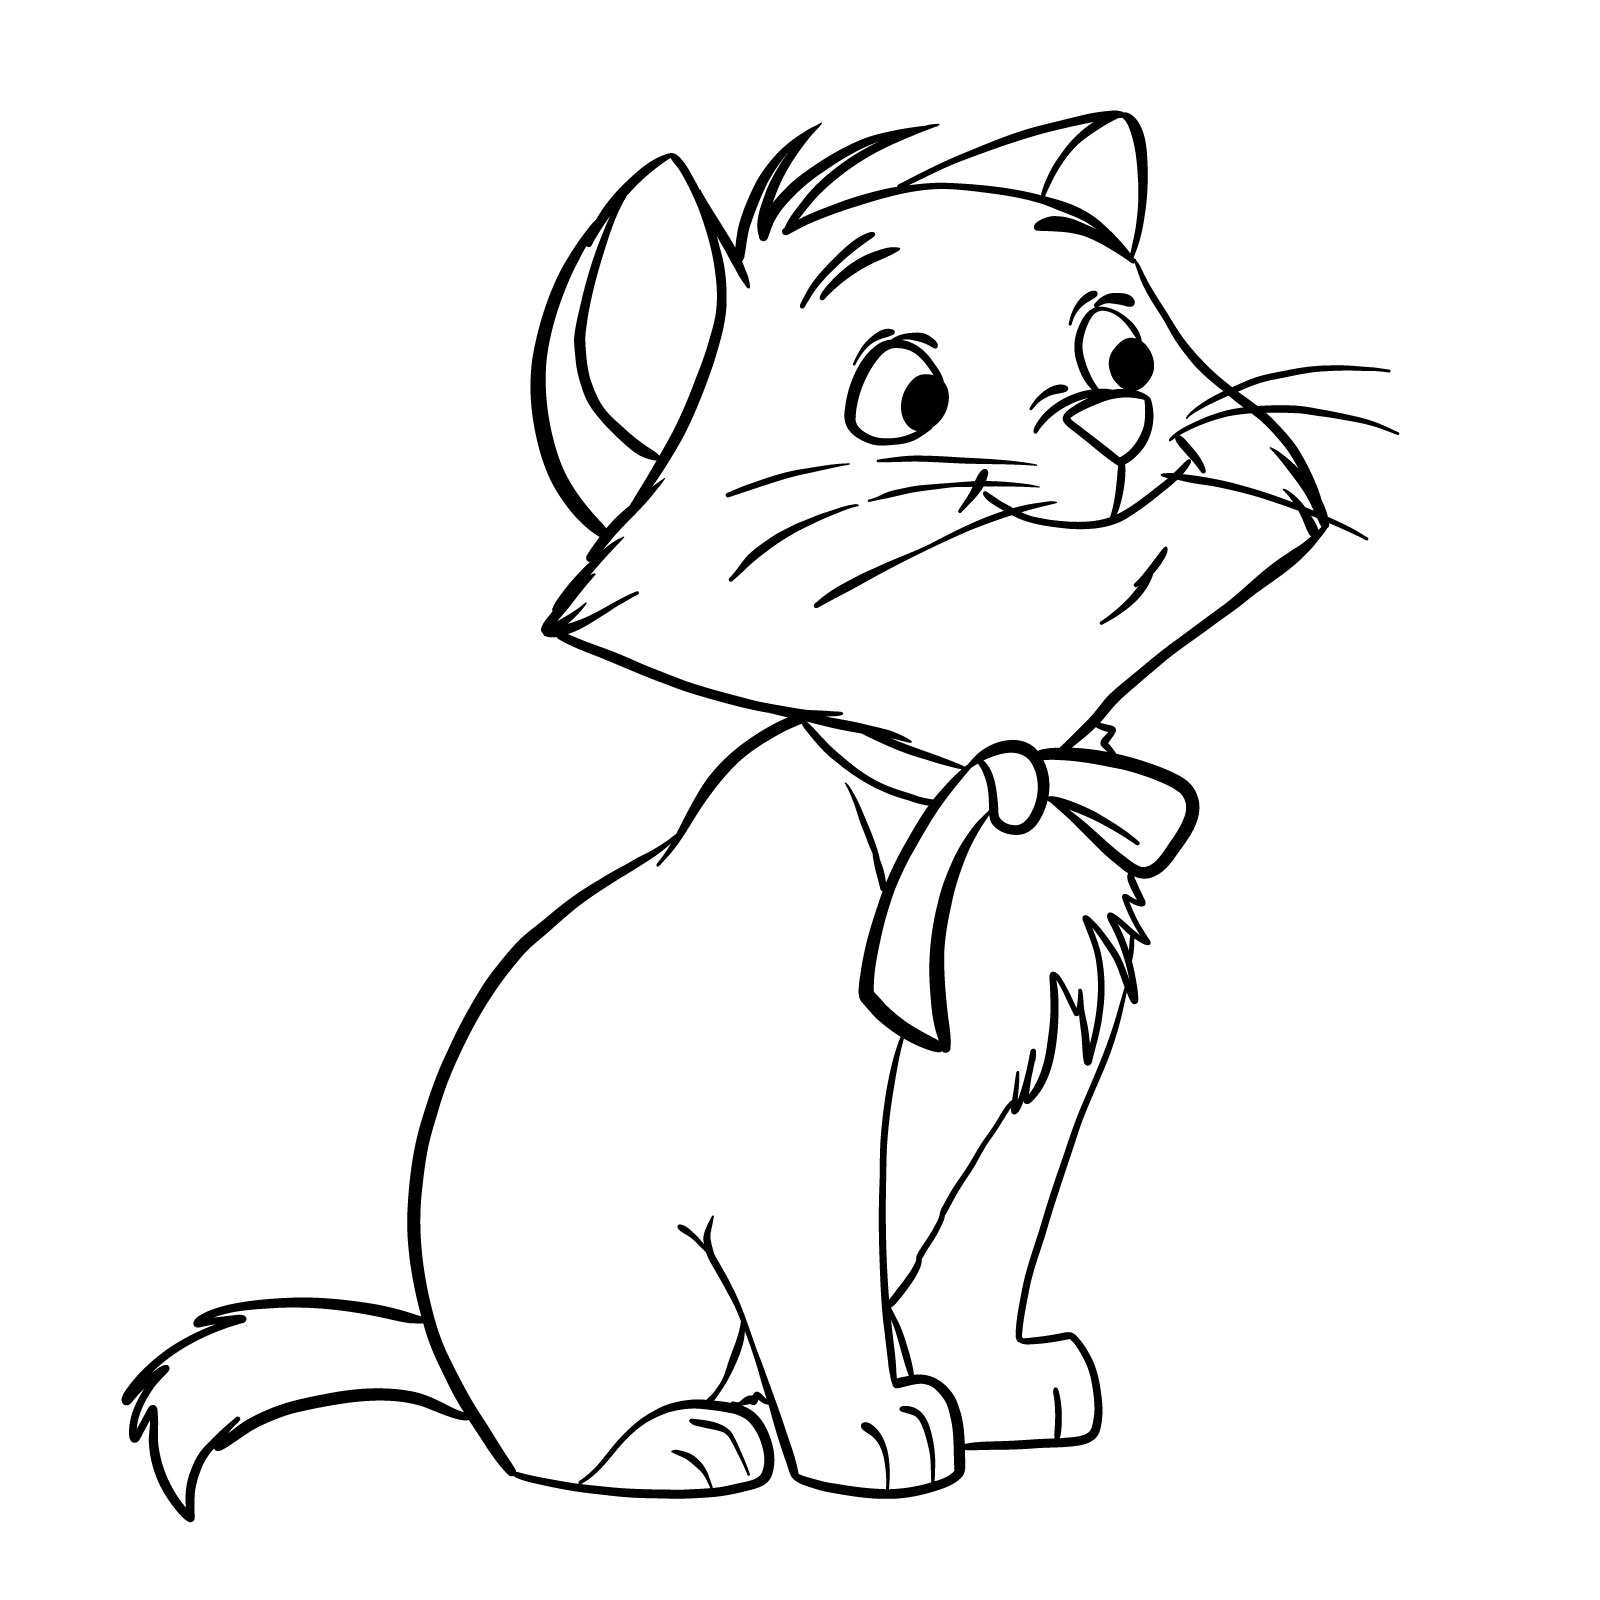 How to draw Berlioz from The Aristocats - final step